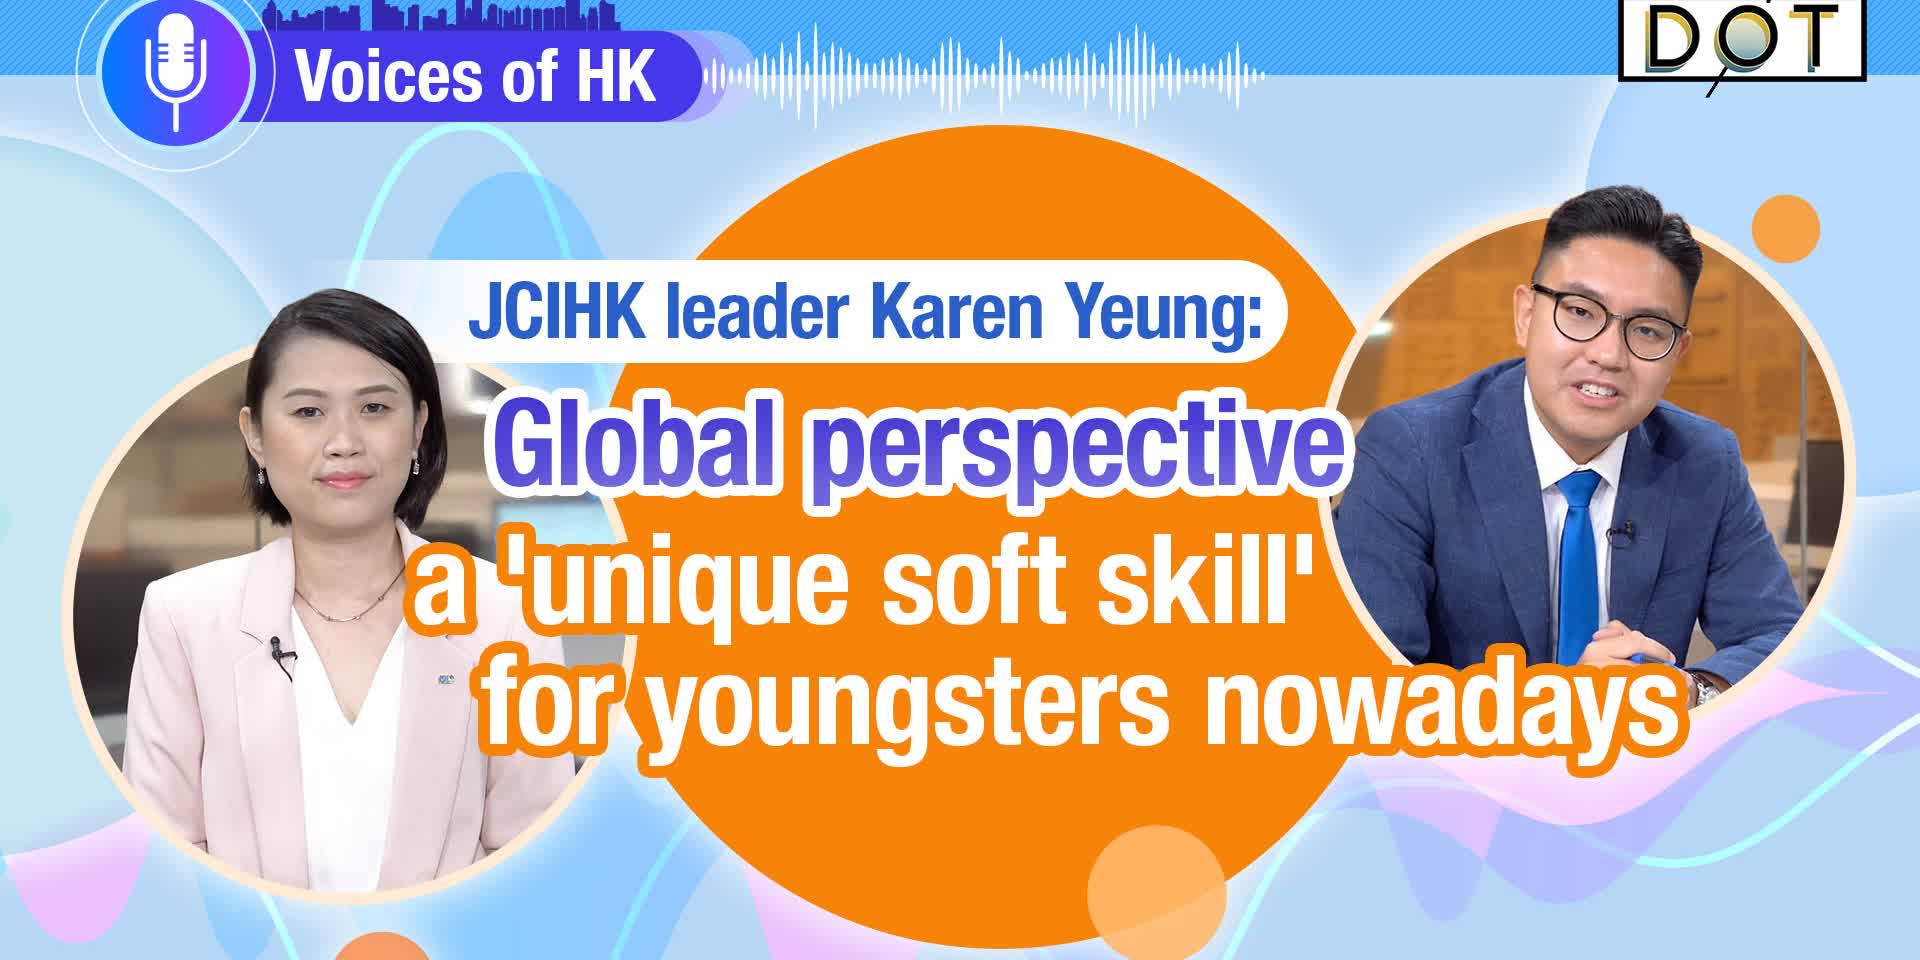 Voices of HK | Karen Yeung: Global perspective a 'unique soft skill' for youngsters nowadays